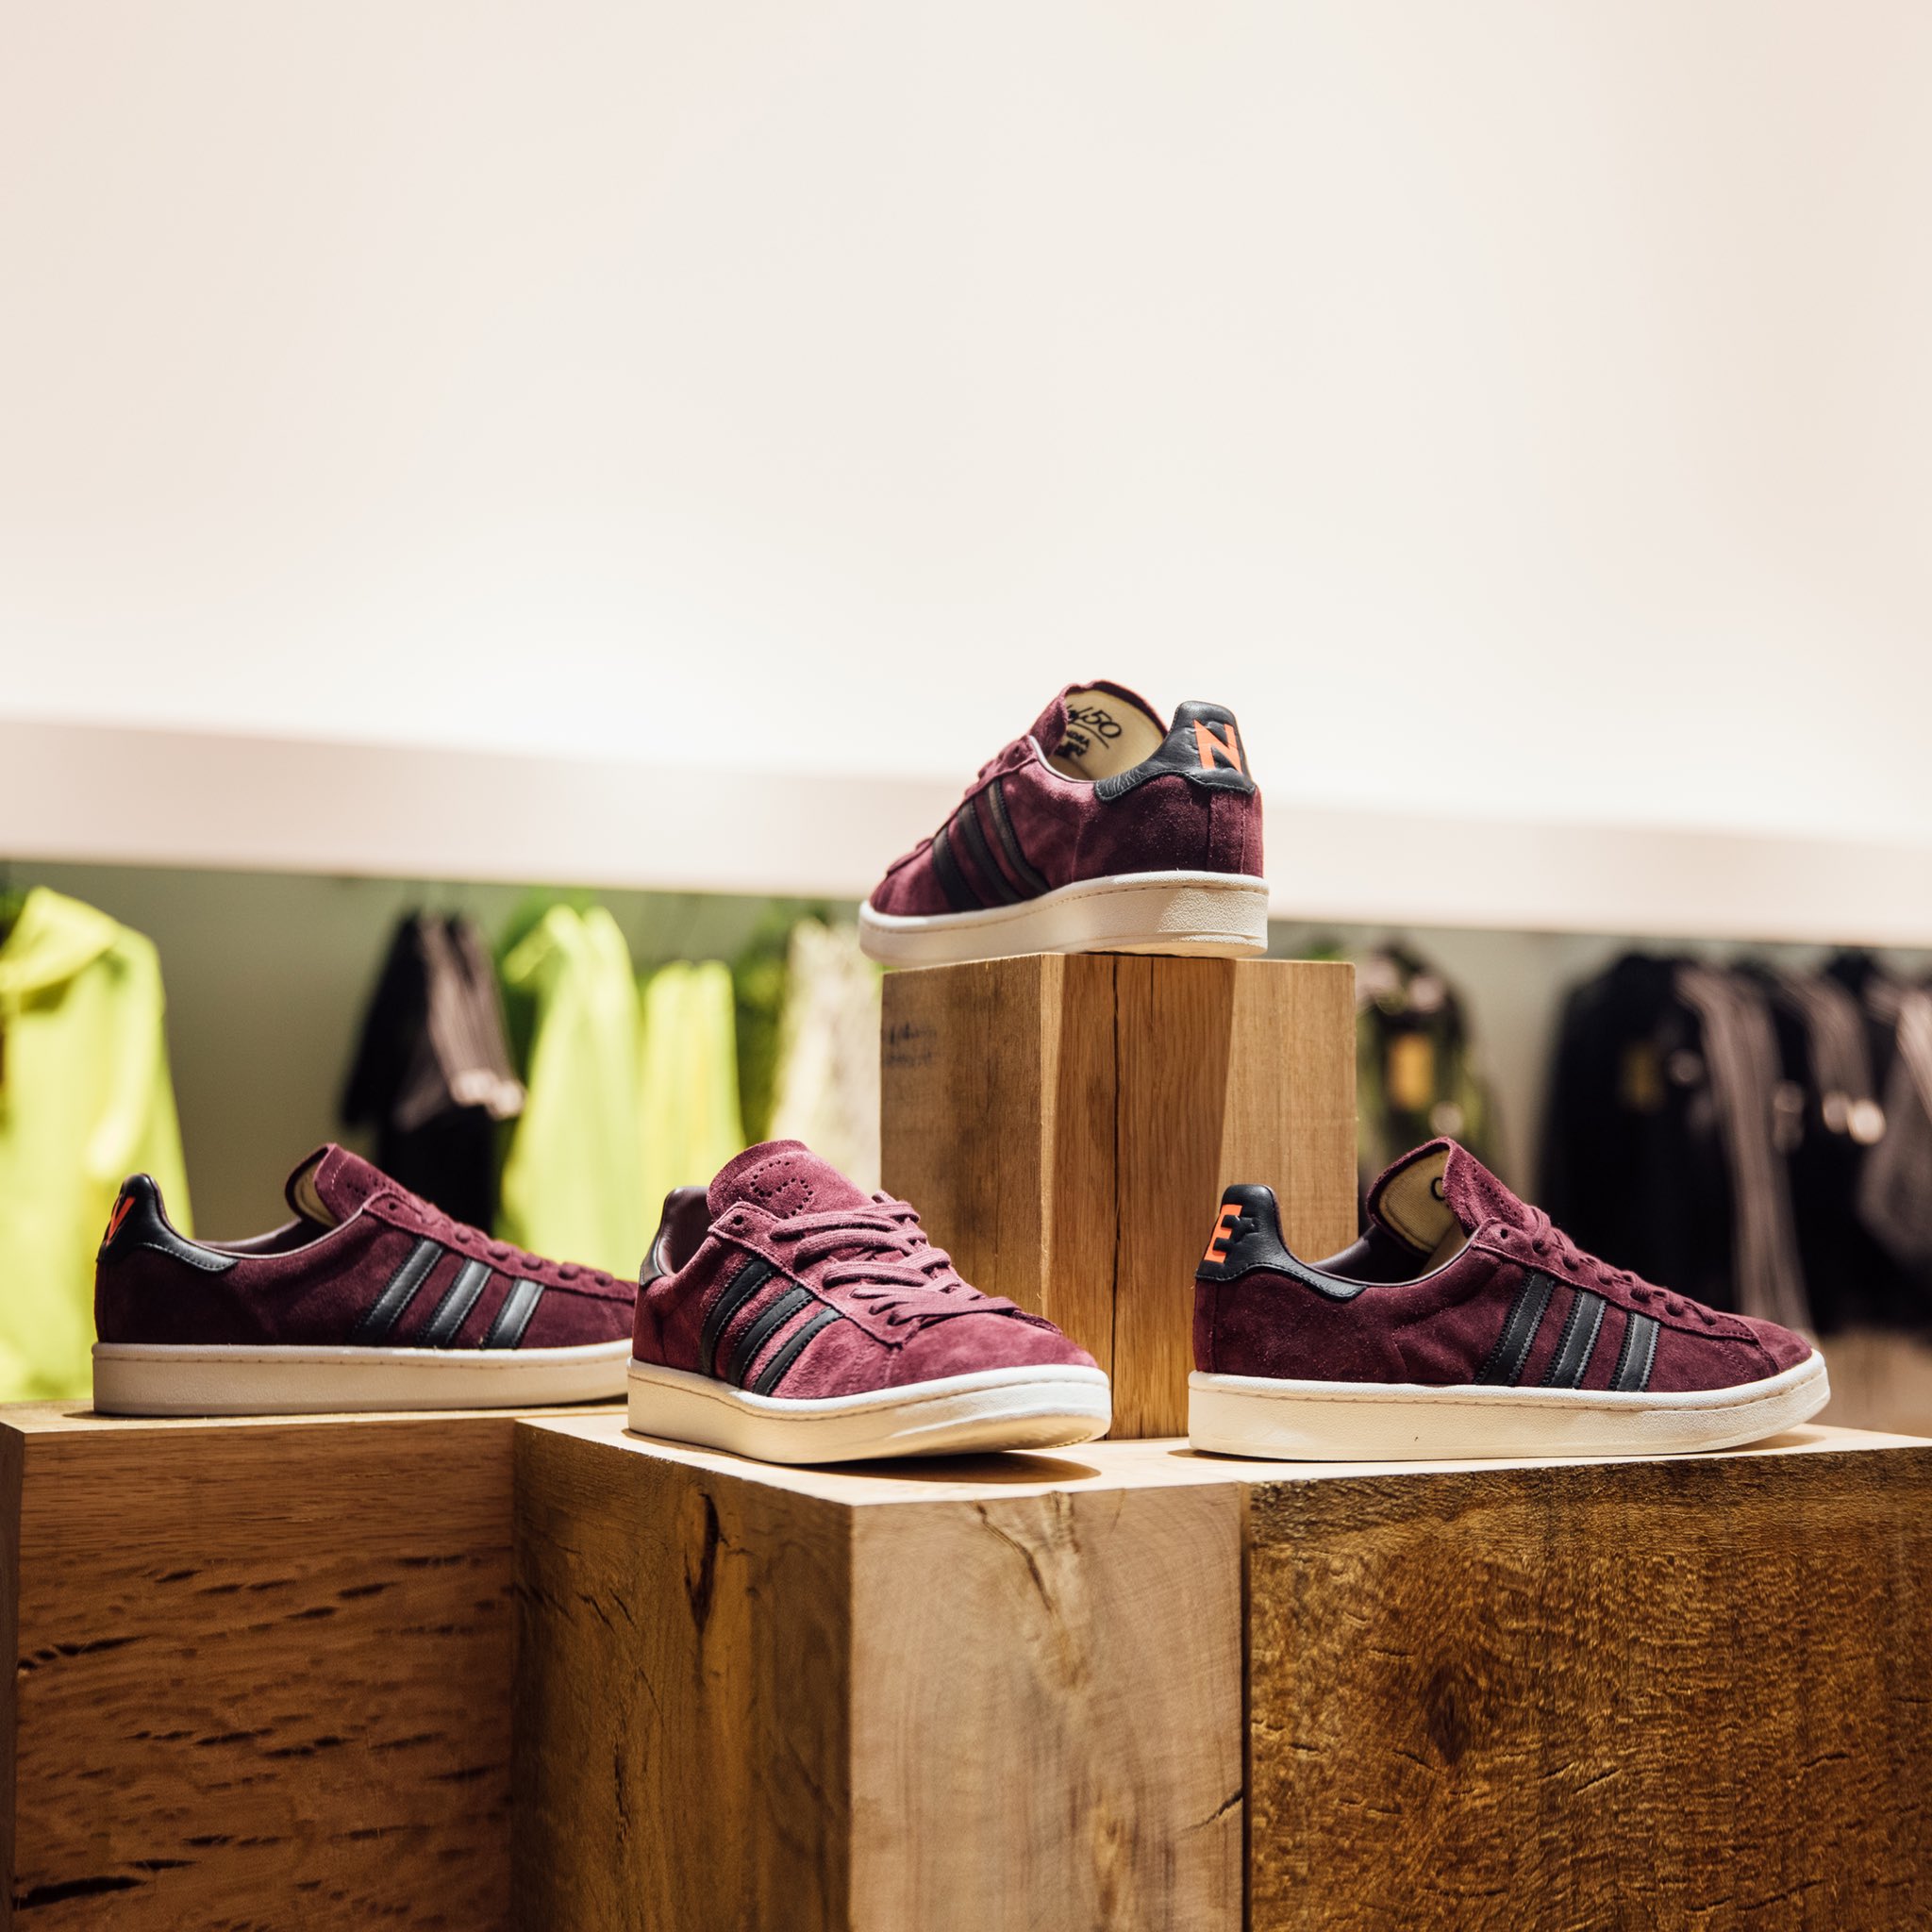 Væve lykke pence adidas Originals on X: "London calling. The doors of the new adidas  Originals Flagship Store are open. If you are in London pay a visit to 15  Hanbury St. #OriginalsLondon https://t.co/tQS9DMtMkg" /